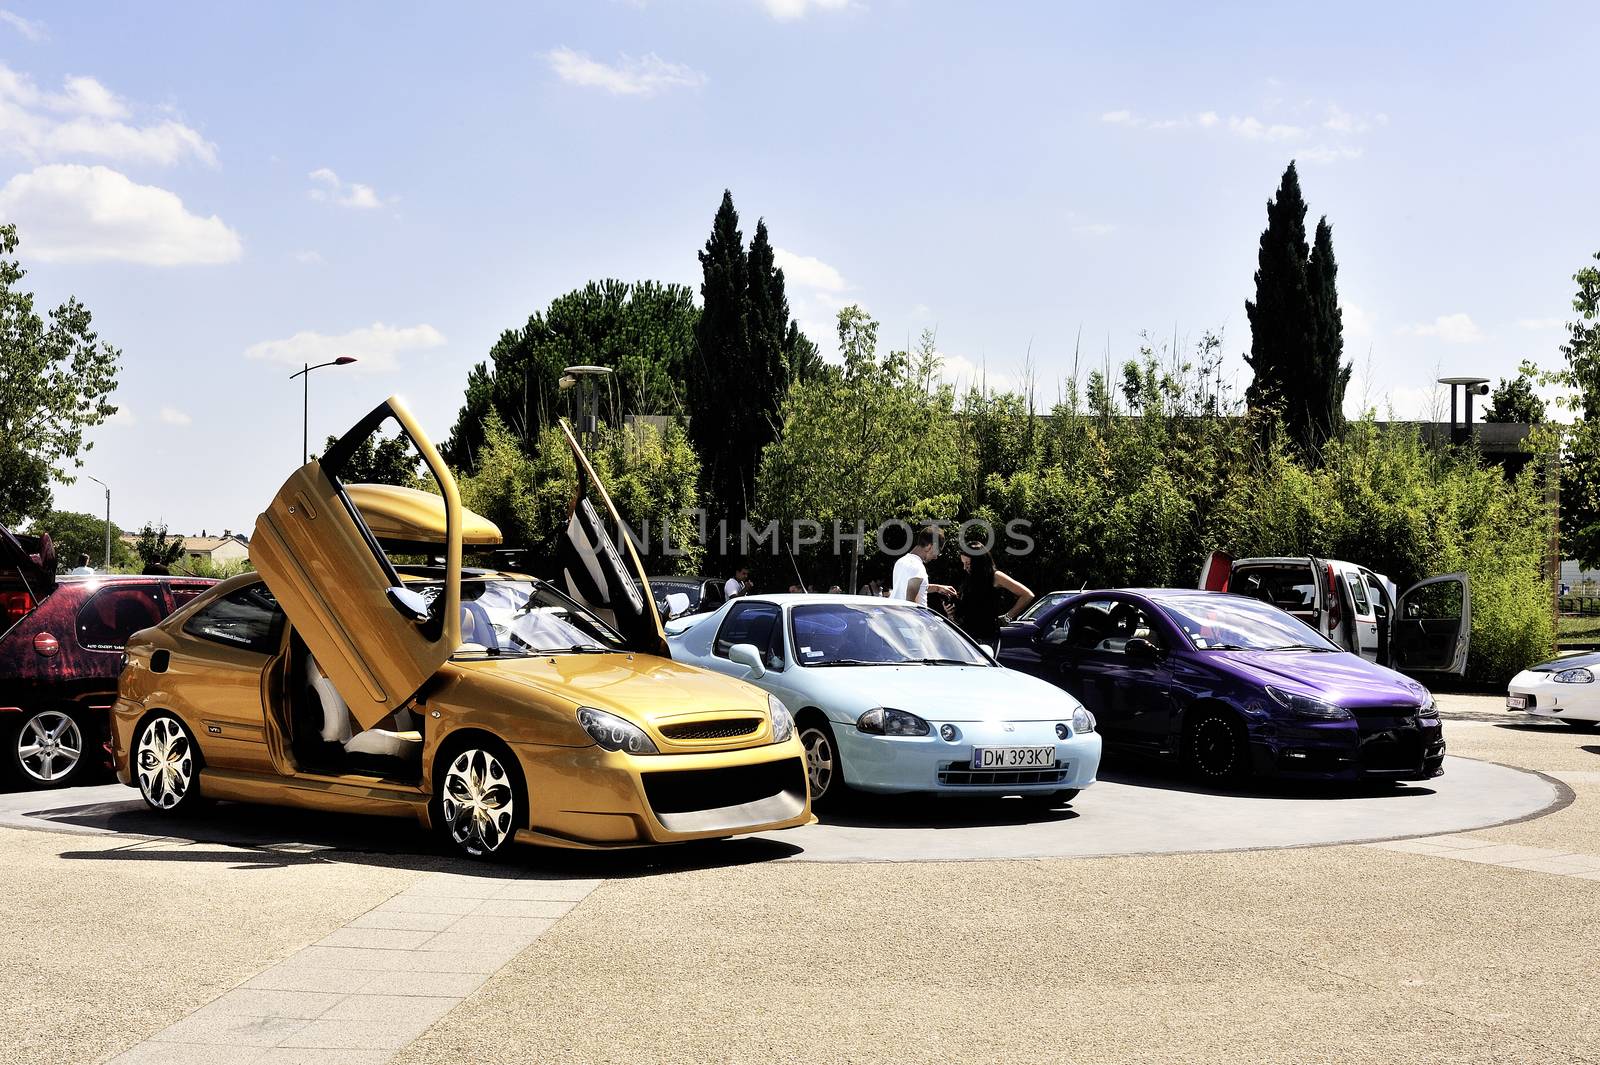 Car tuning exhibition in Saint-Christole-les-Ales in the French department of Gard.